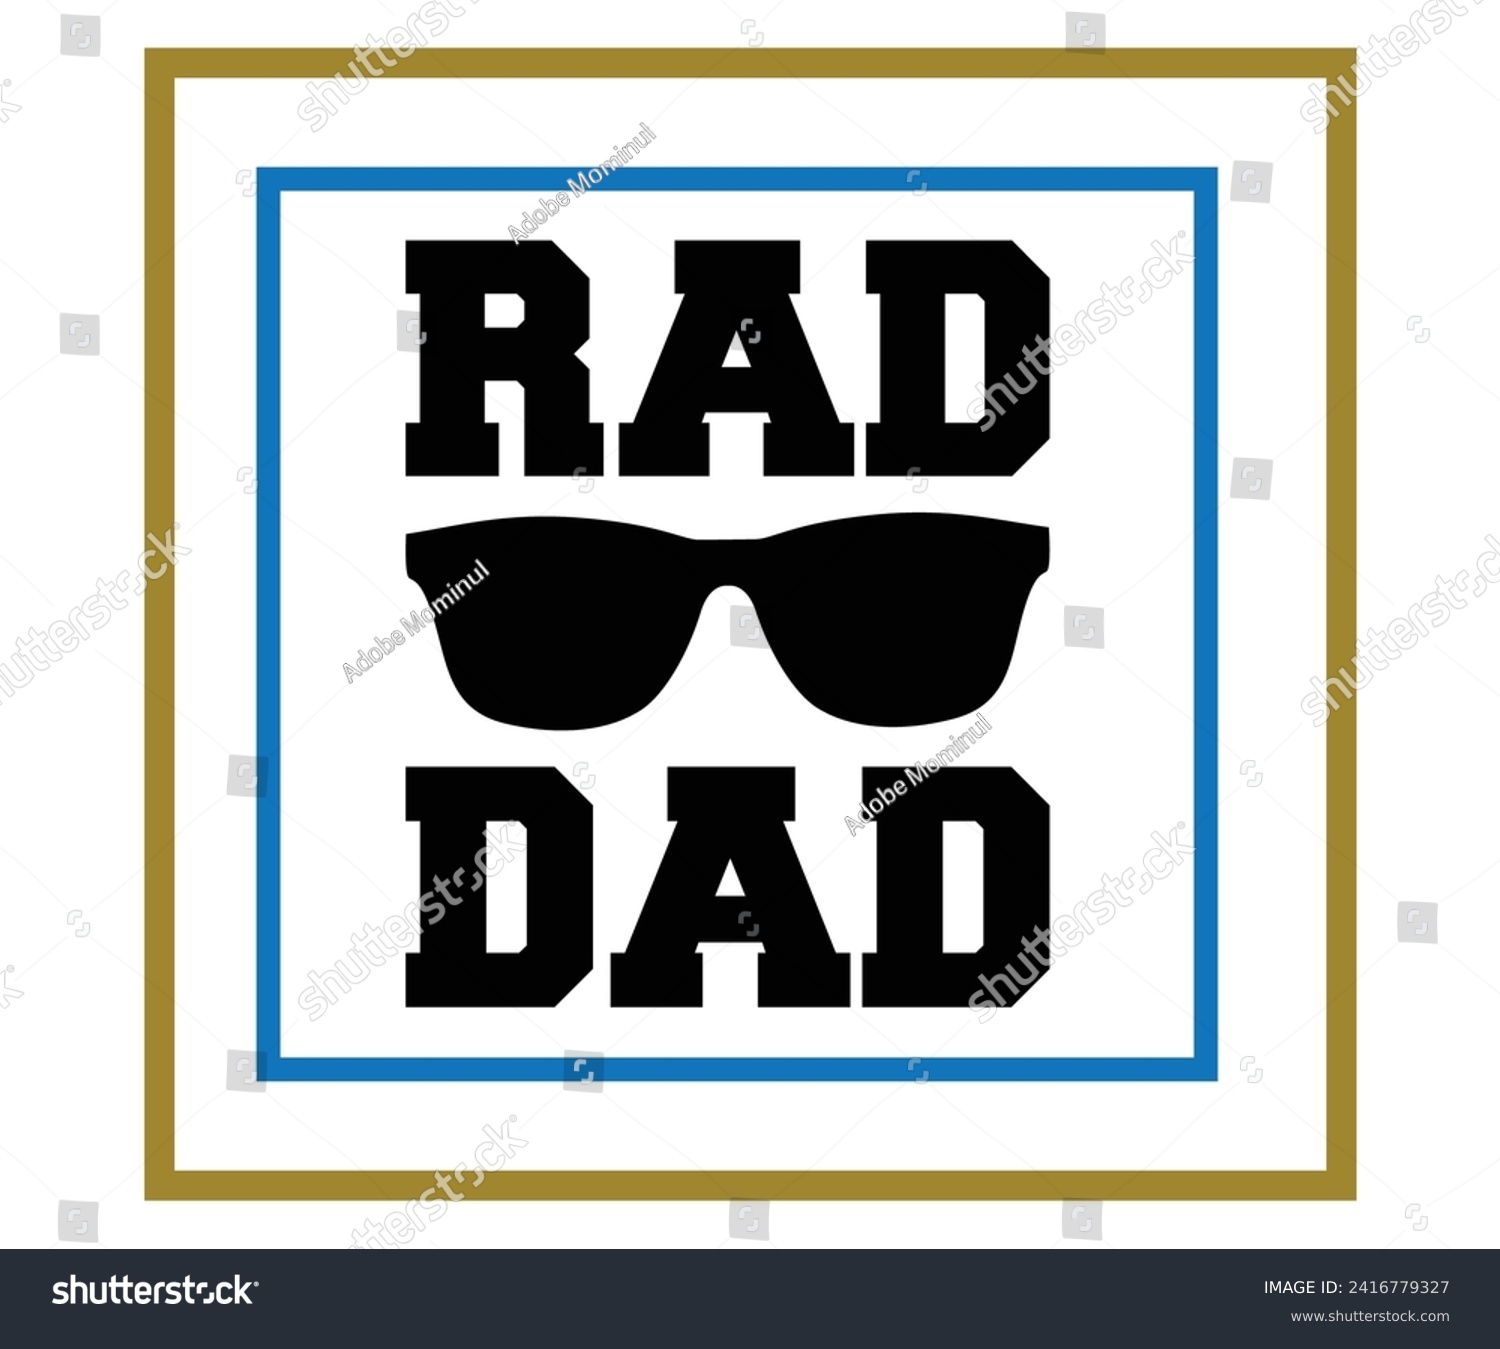 SVG of Rad Dad Svg,Retro,Father's Day Svg,Papa svg,Grandpa Svg,Father's Day Saying Qoutes,Dad Svg,Funny Father, Gift For Dad Svg,Daddy Svg,Family Svg,T shirt Design,Svg Cut File,Typography,commercial Use svg